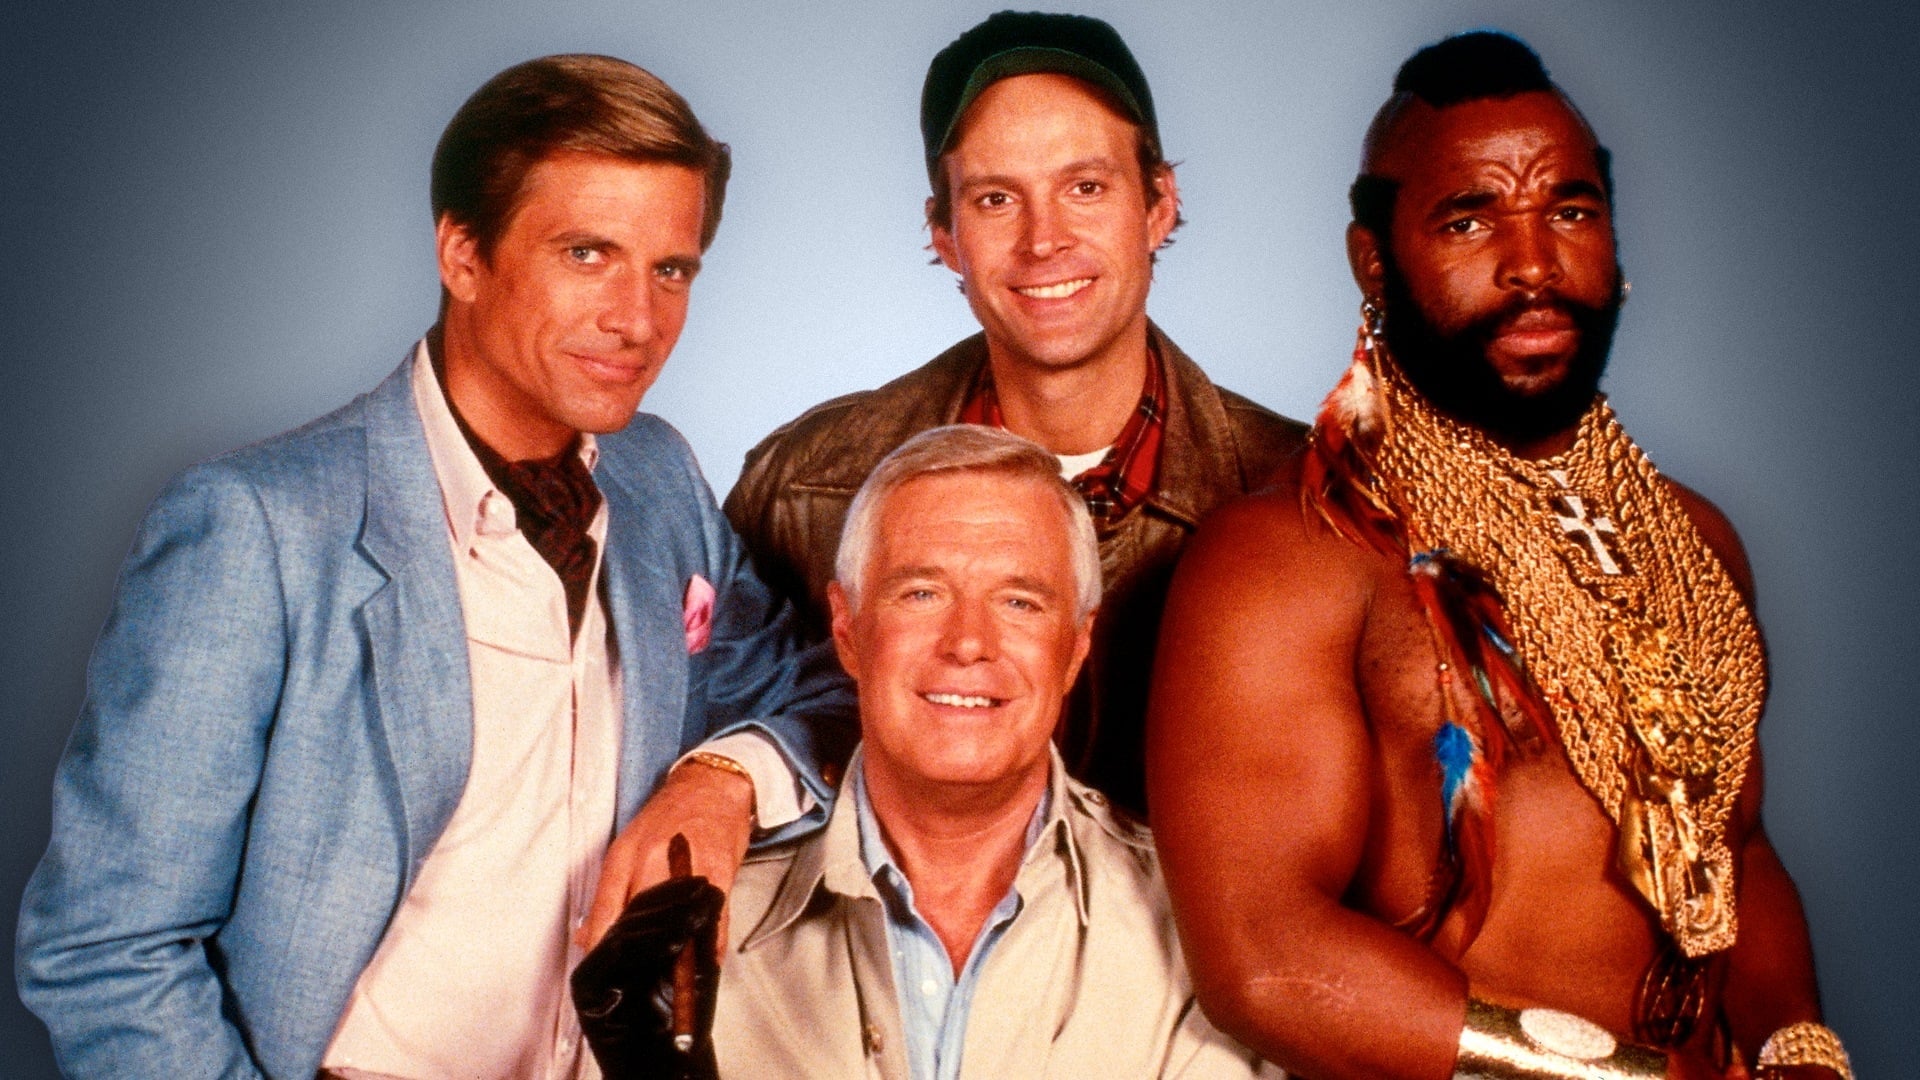 The A-Team: The Complete Collection - Seasons 1-5